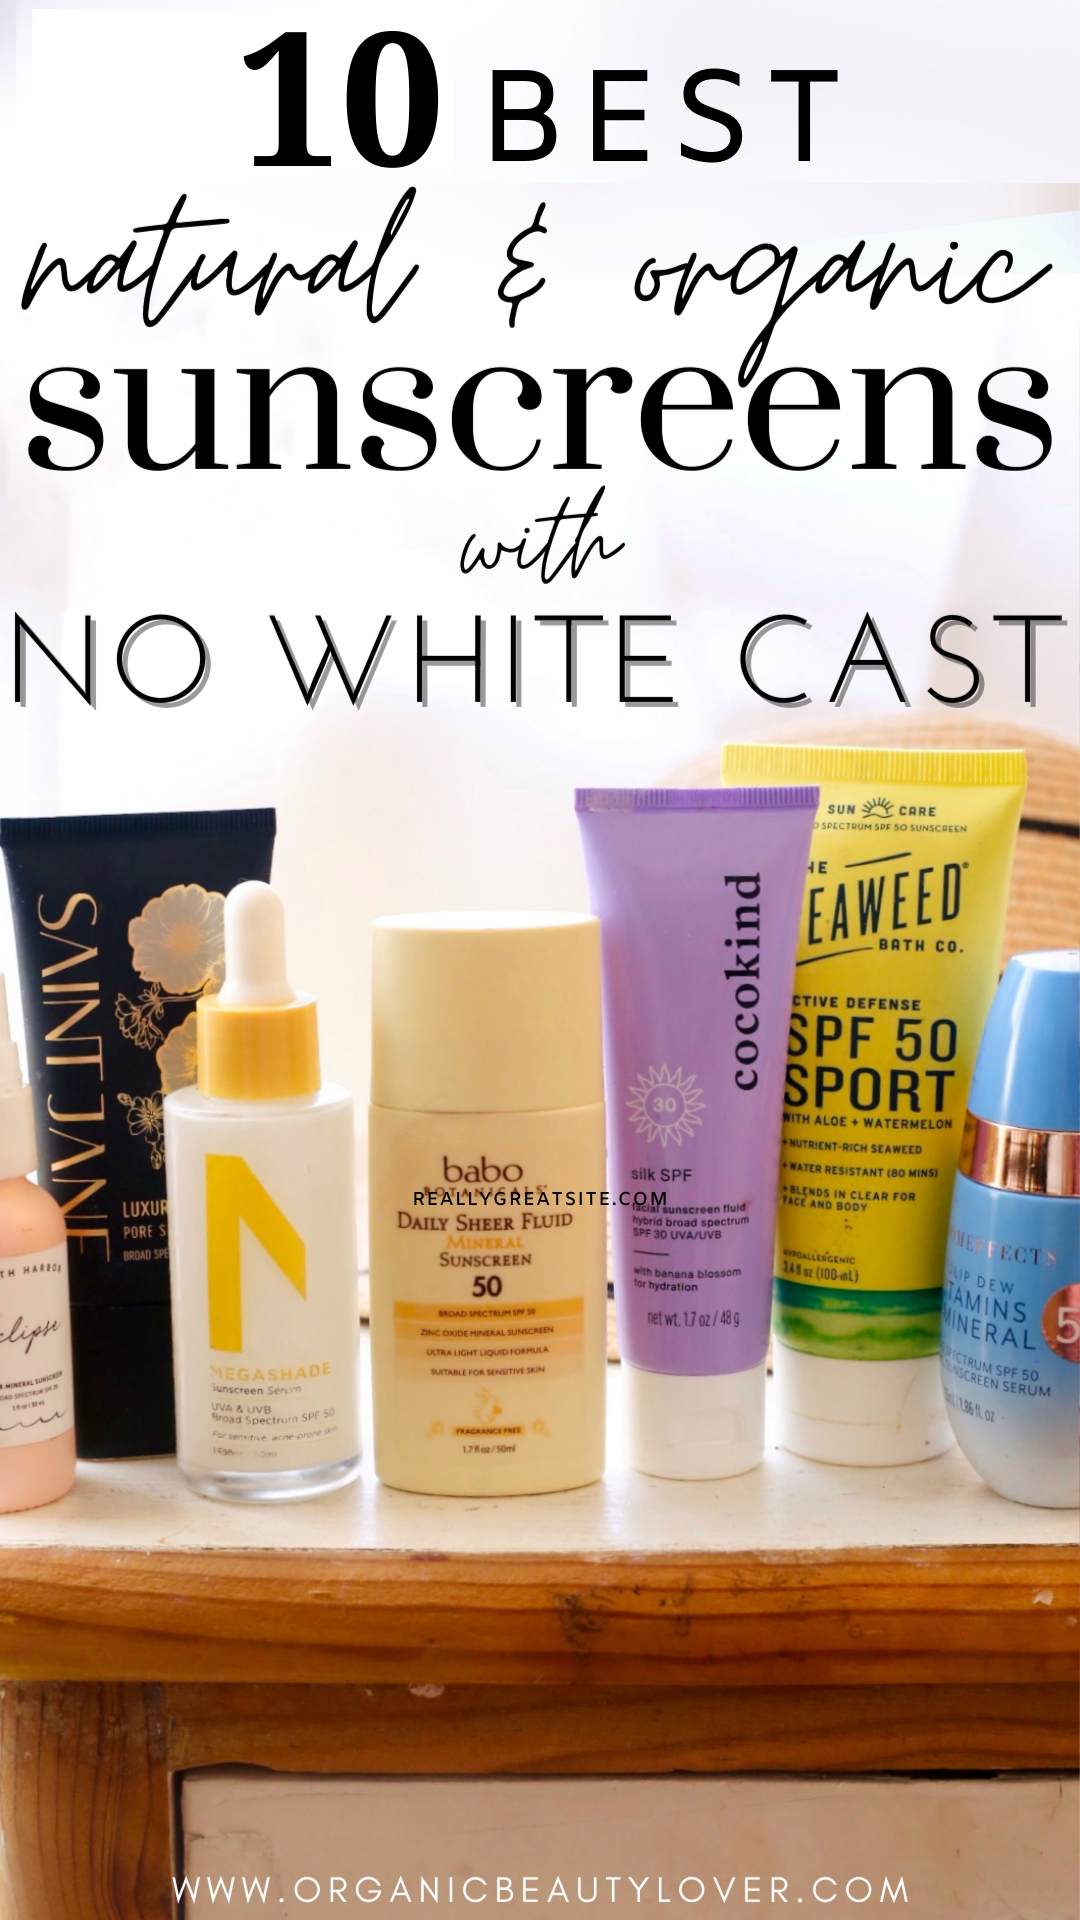 Best natural sunscreens without white cast